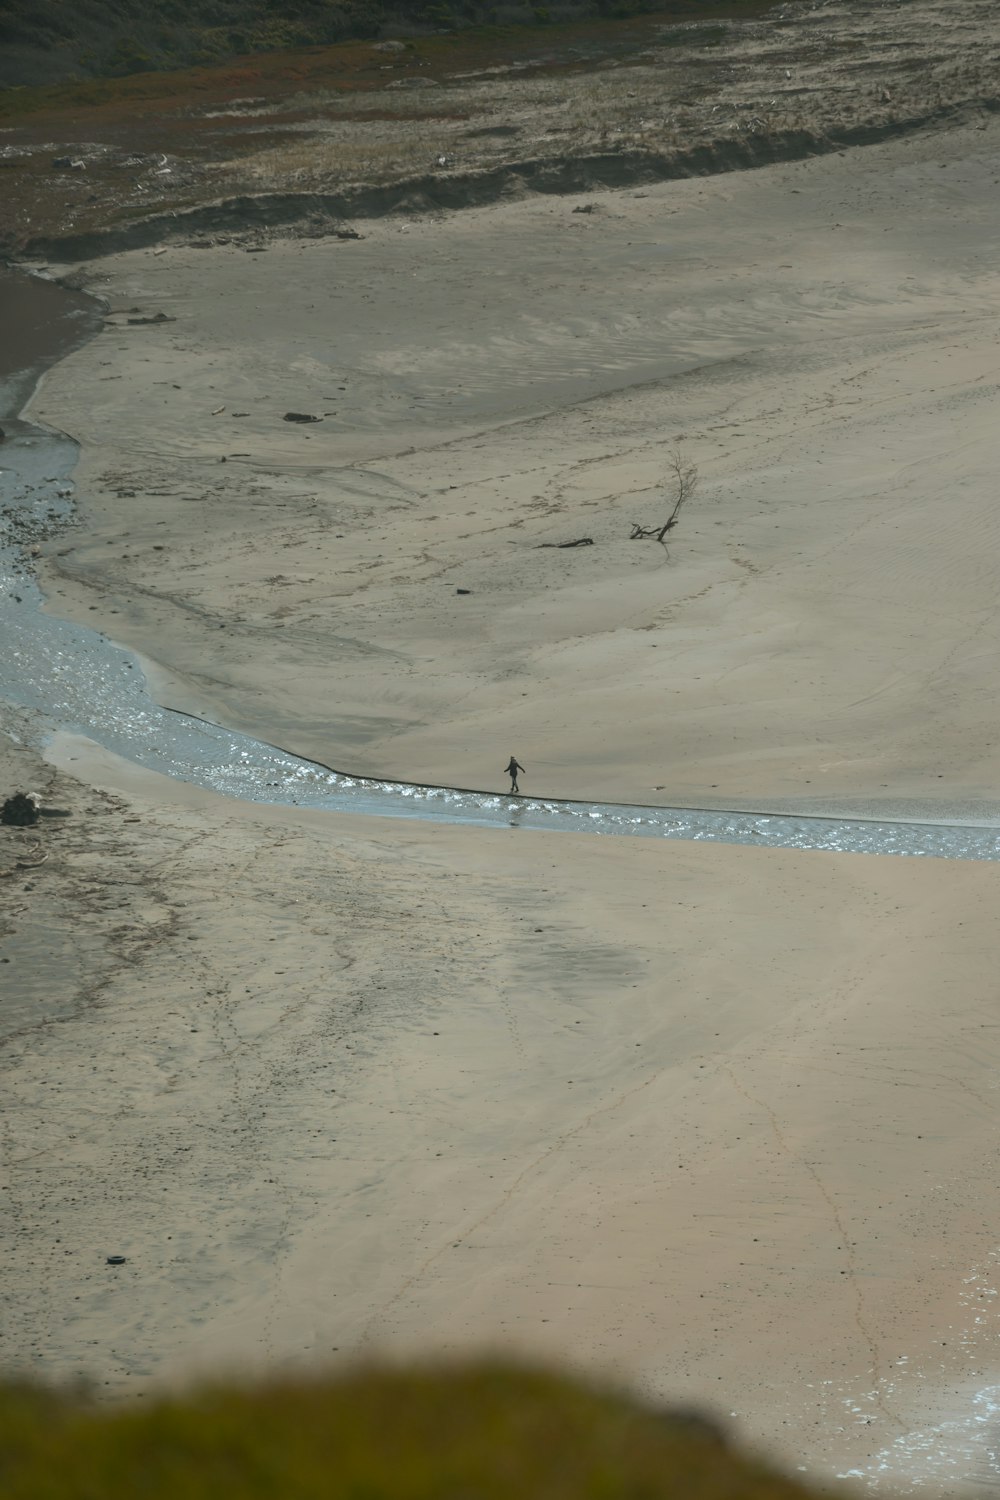 a person walking across a sandy beach next to a body of water